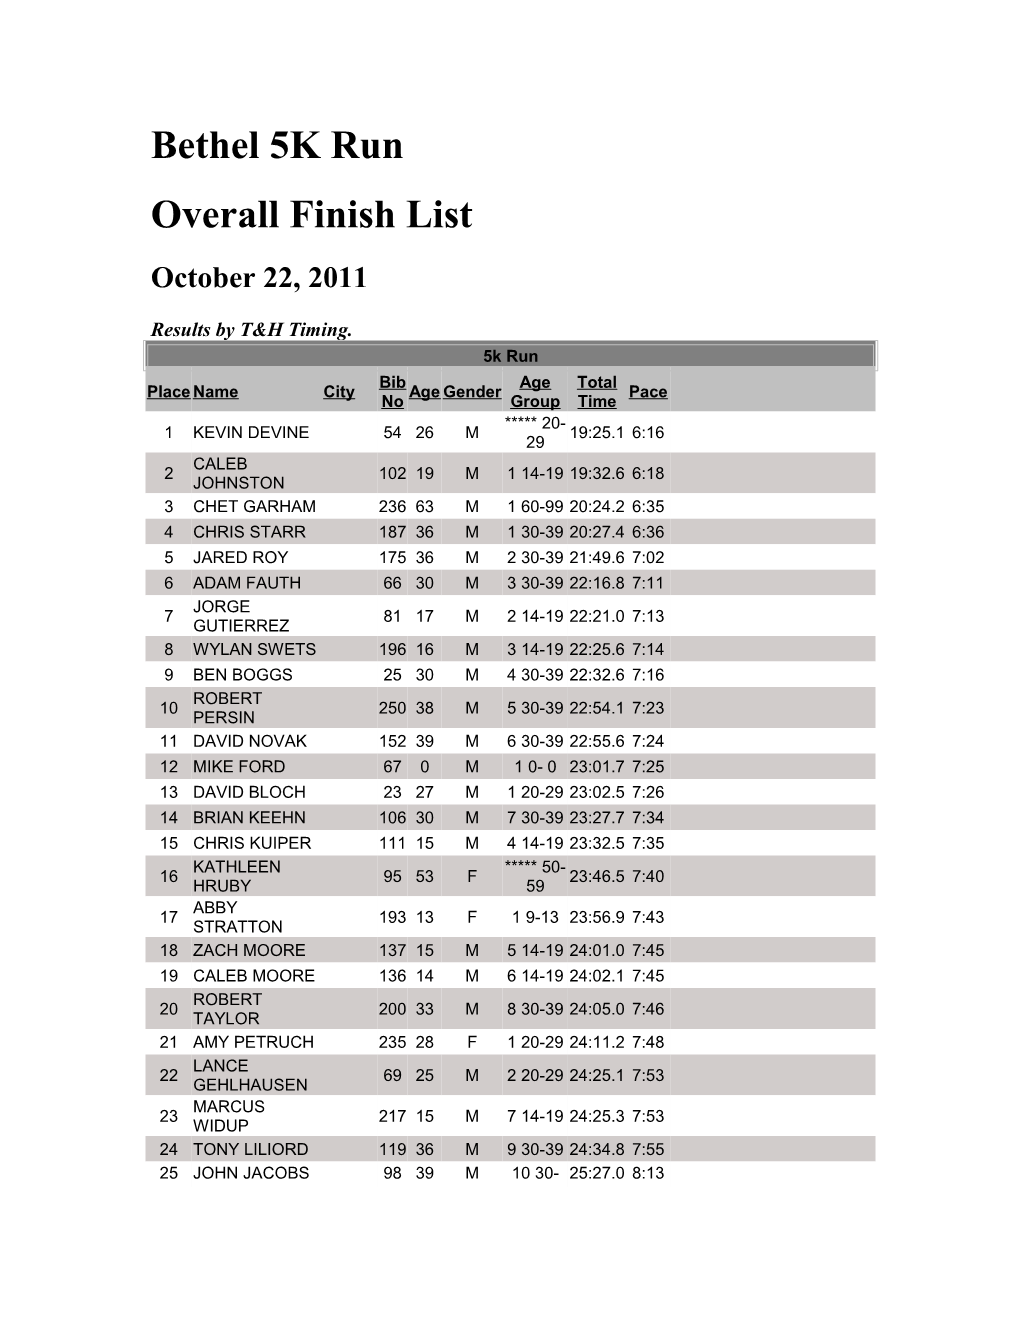 Overall Finish List s2